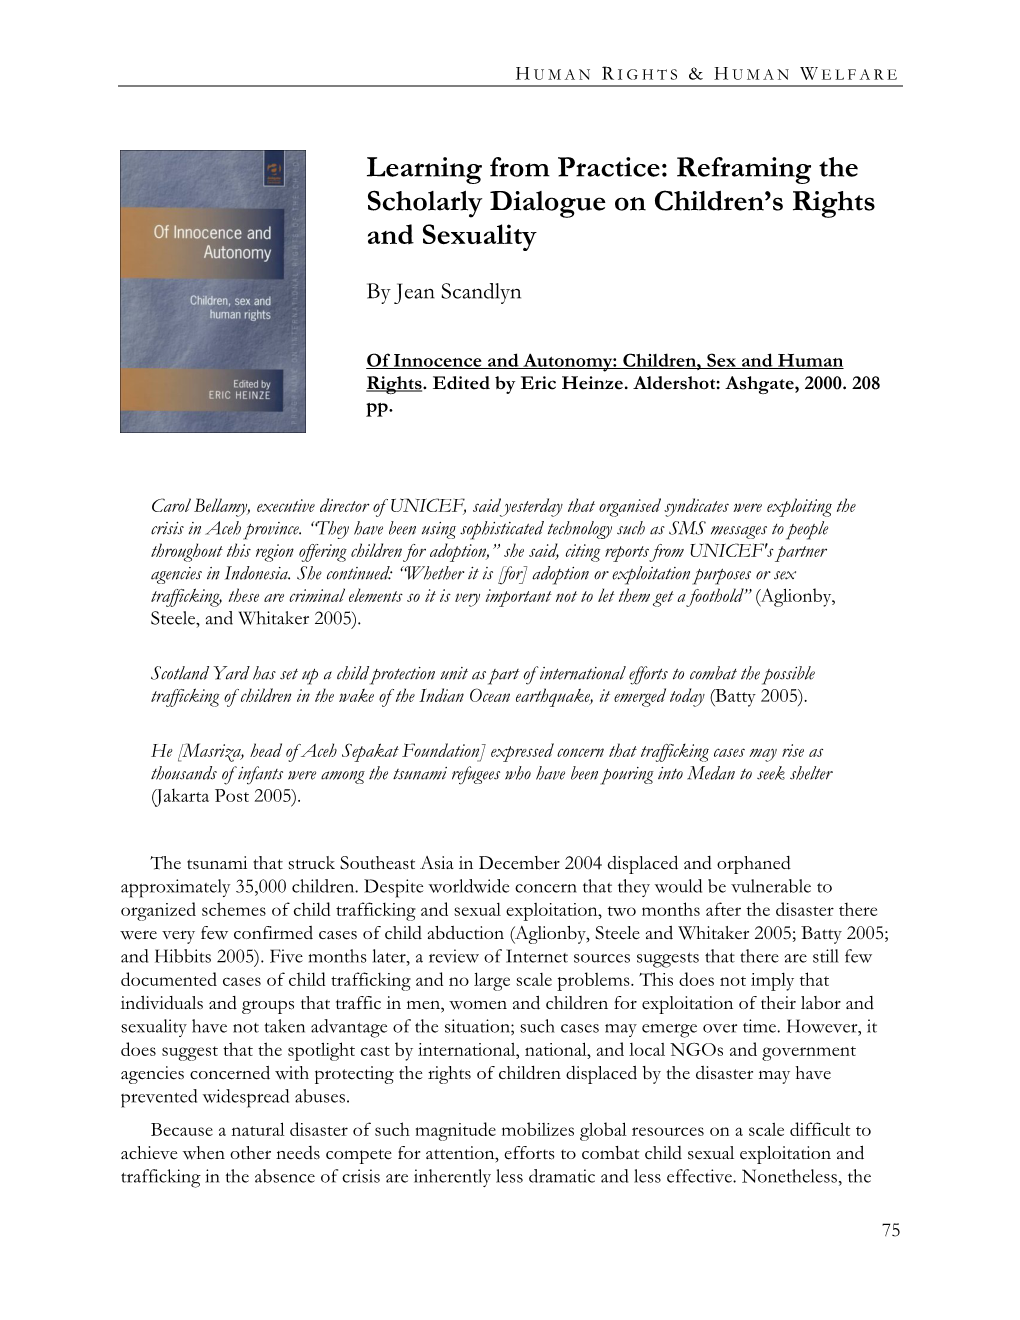 Reframing the Scholarly Dialogue on Children's